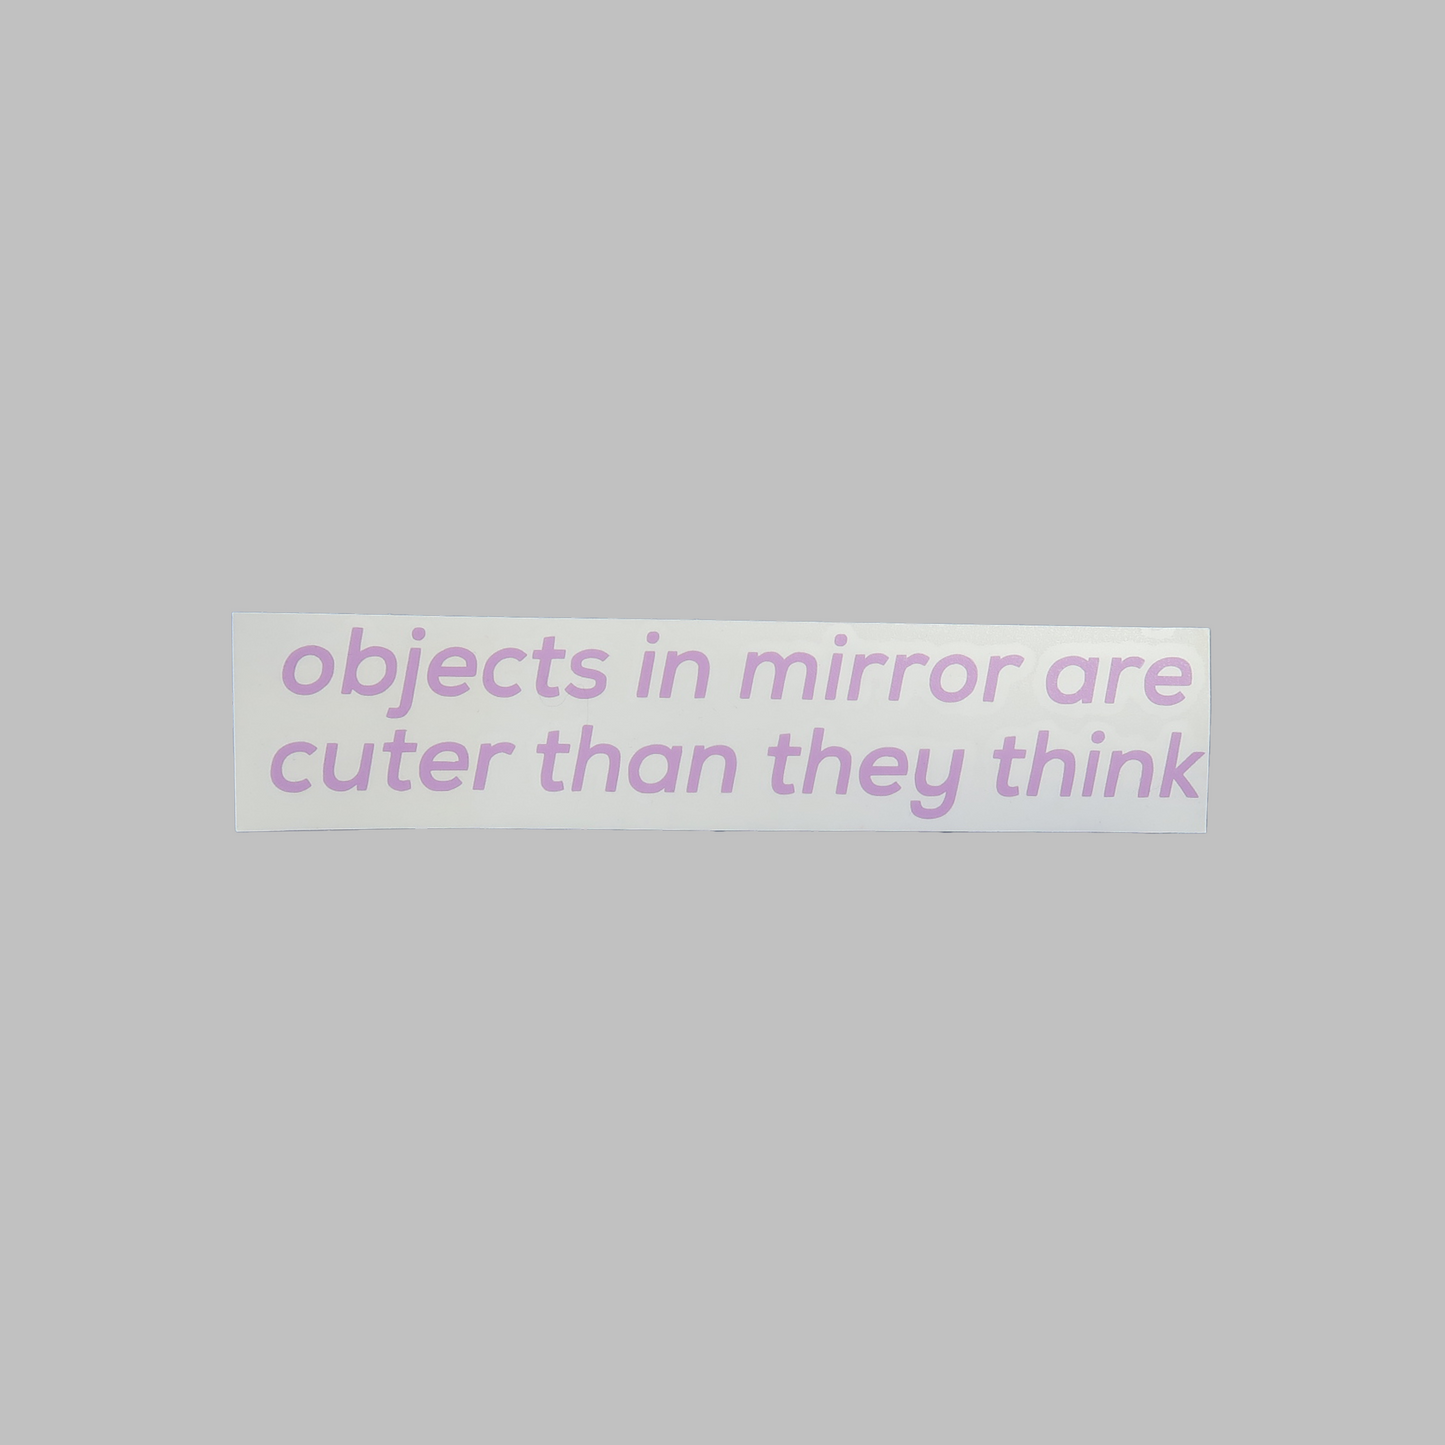 Objects in mirror are cuter than they think - vinyldekal